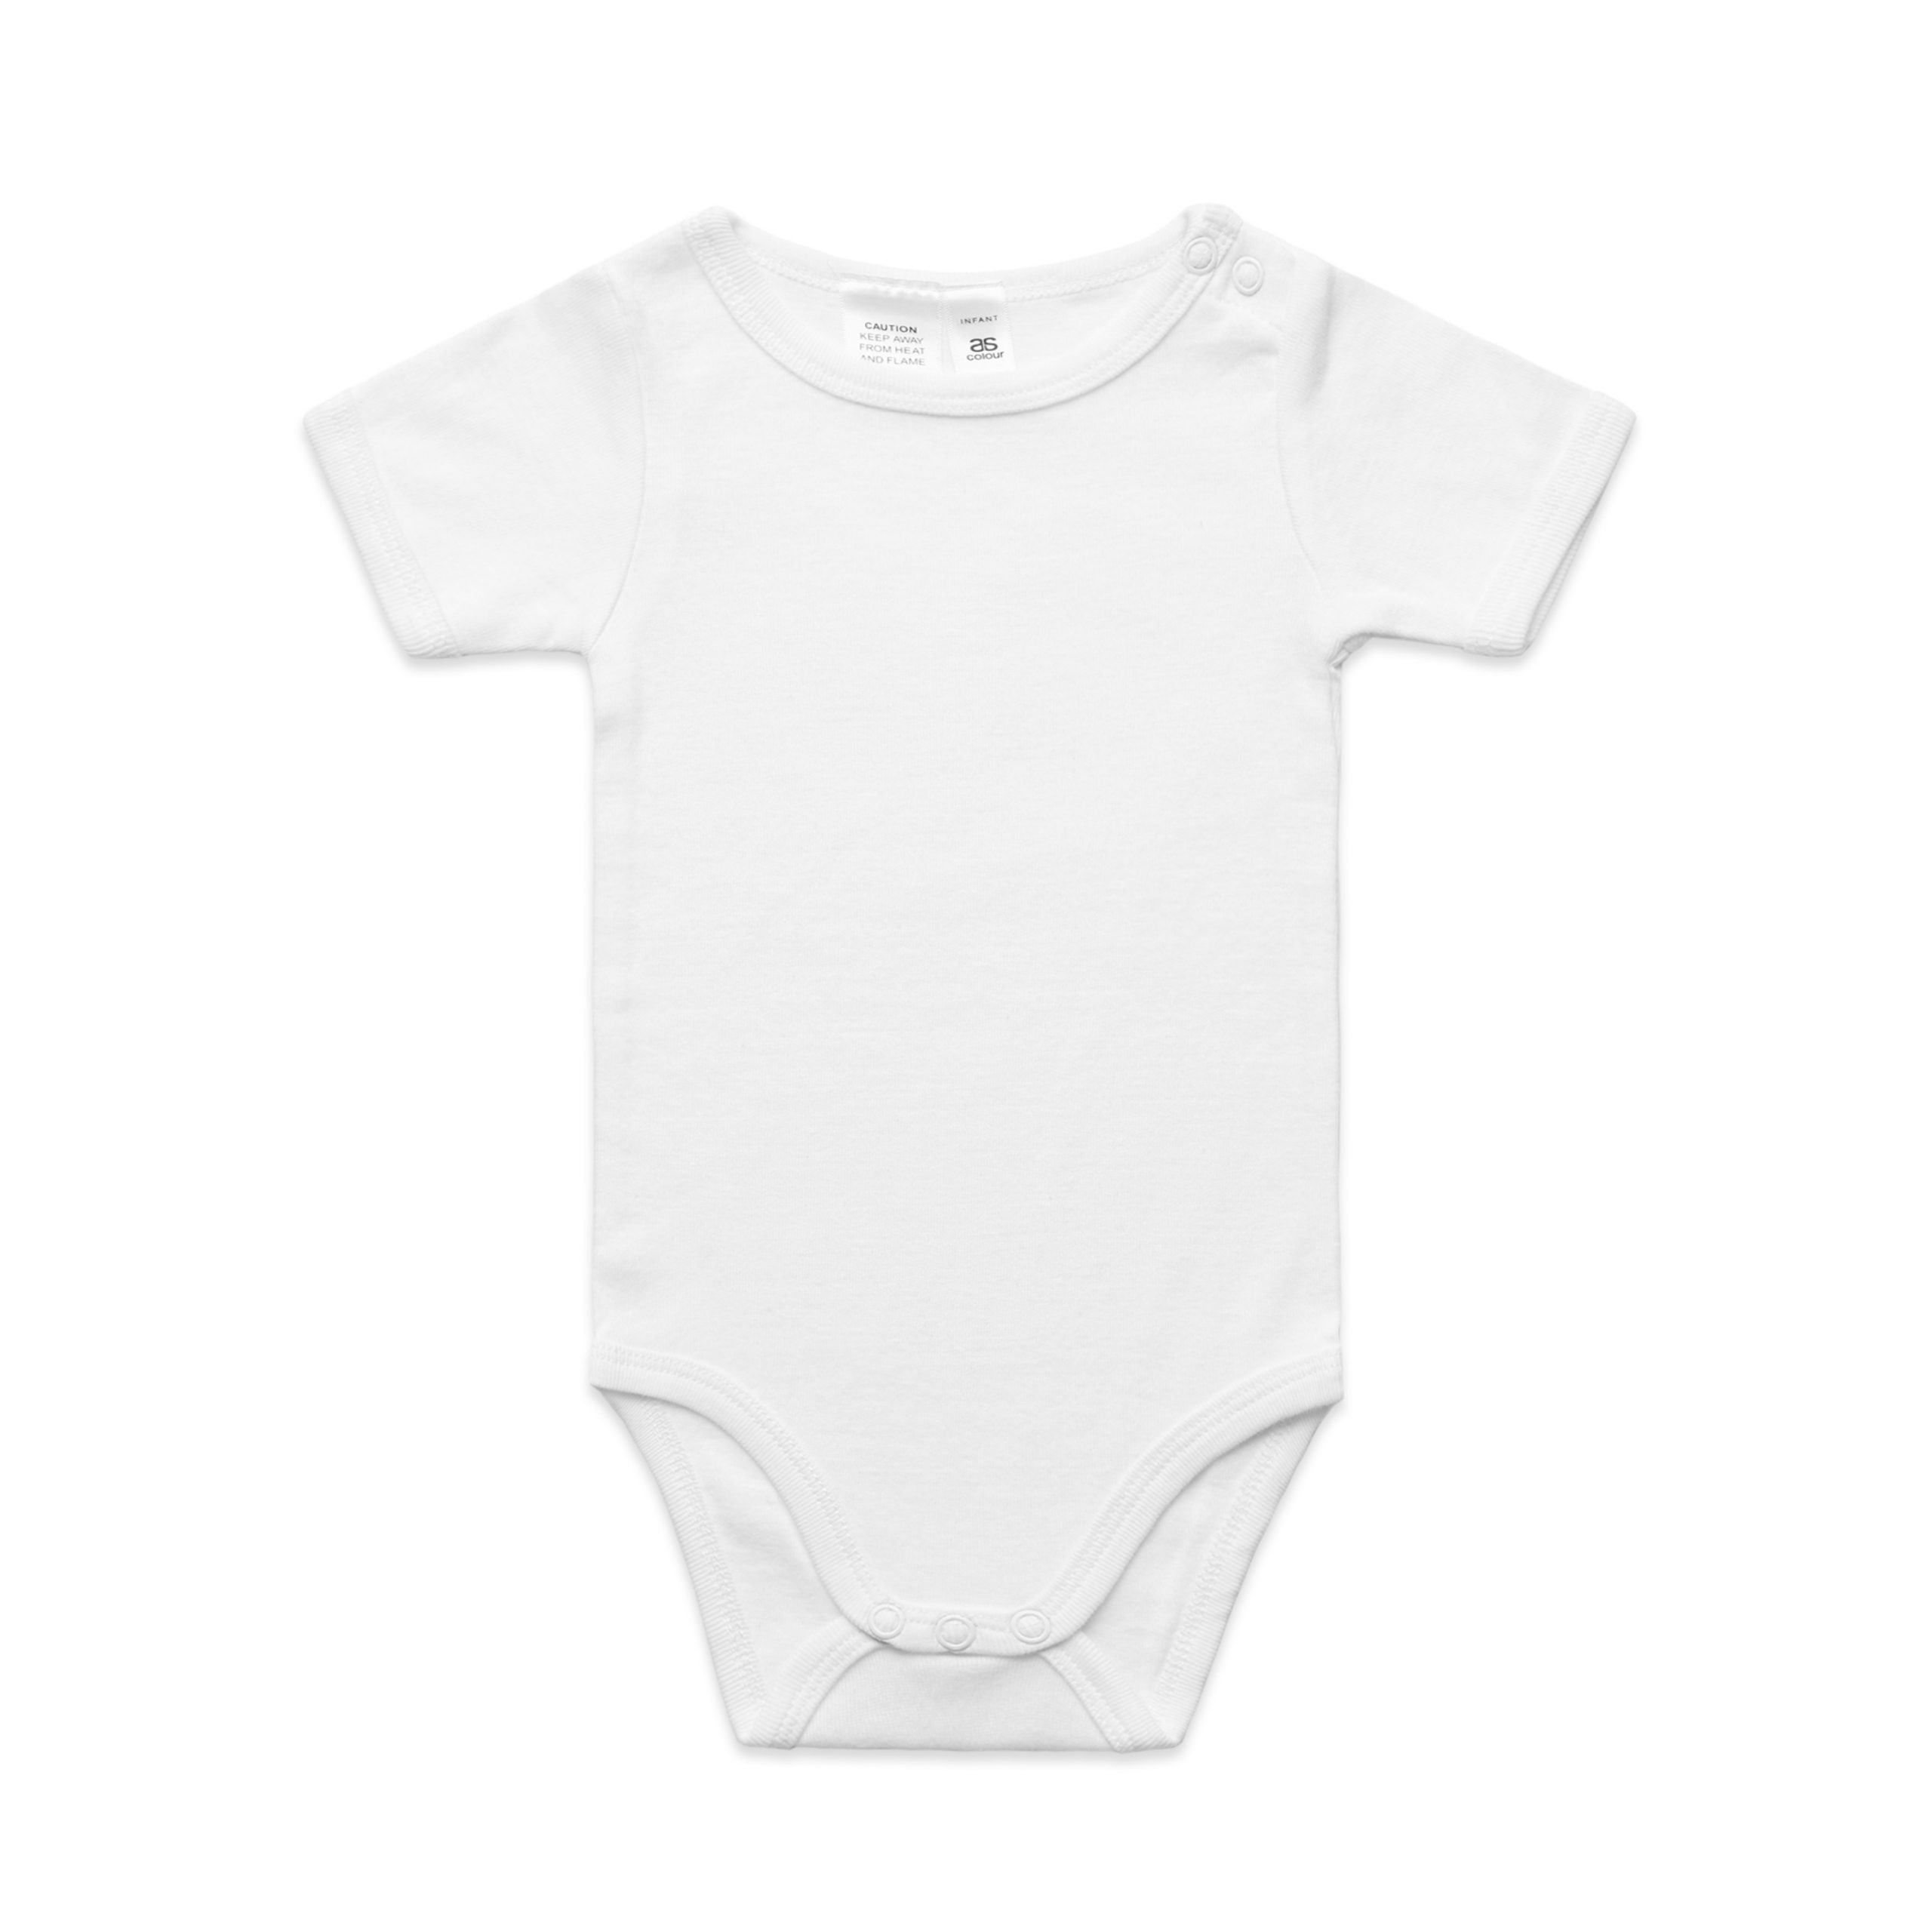 3003_AS_Infant-Mini-Me-One-Piece_White-scaled